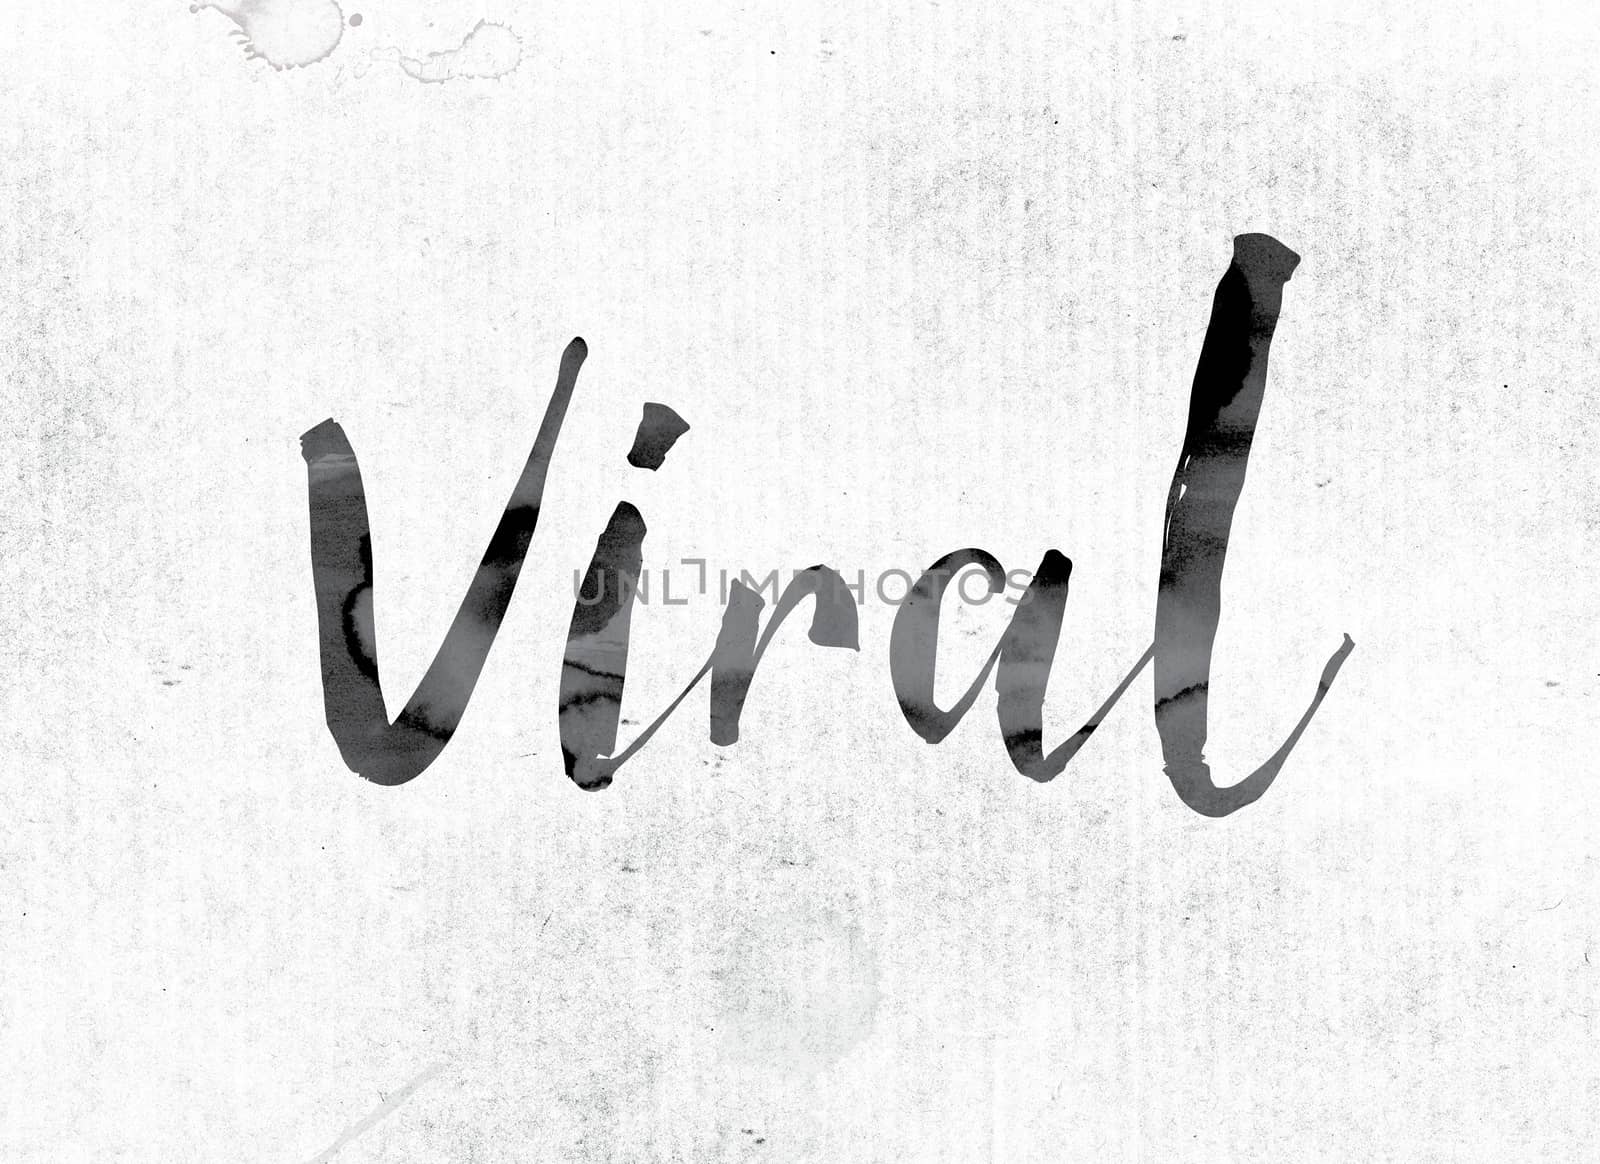 The word "Viral" concept and theme painted in watercolor ink on a white paper.